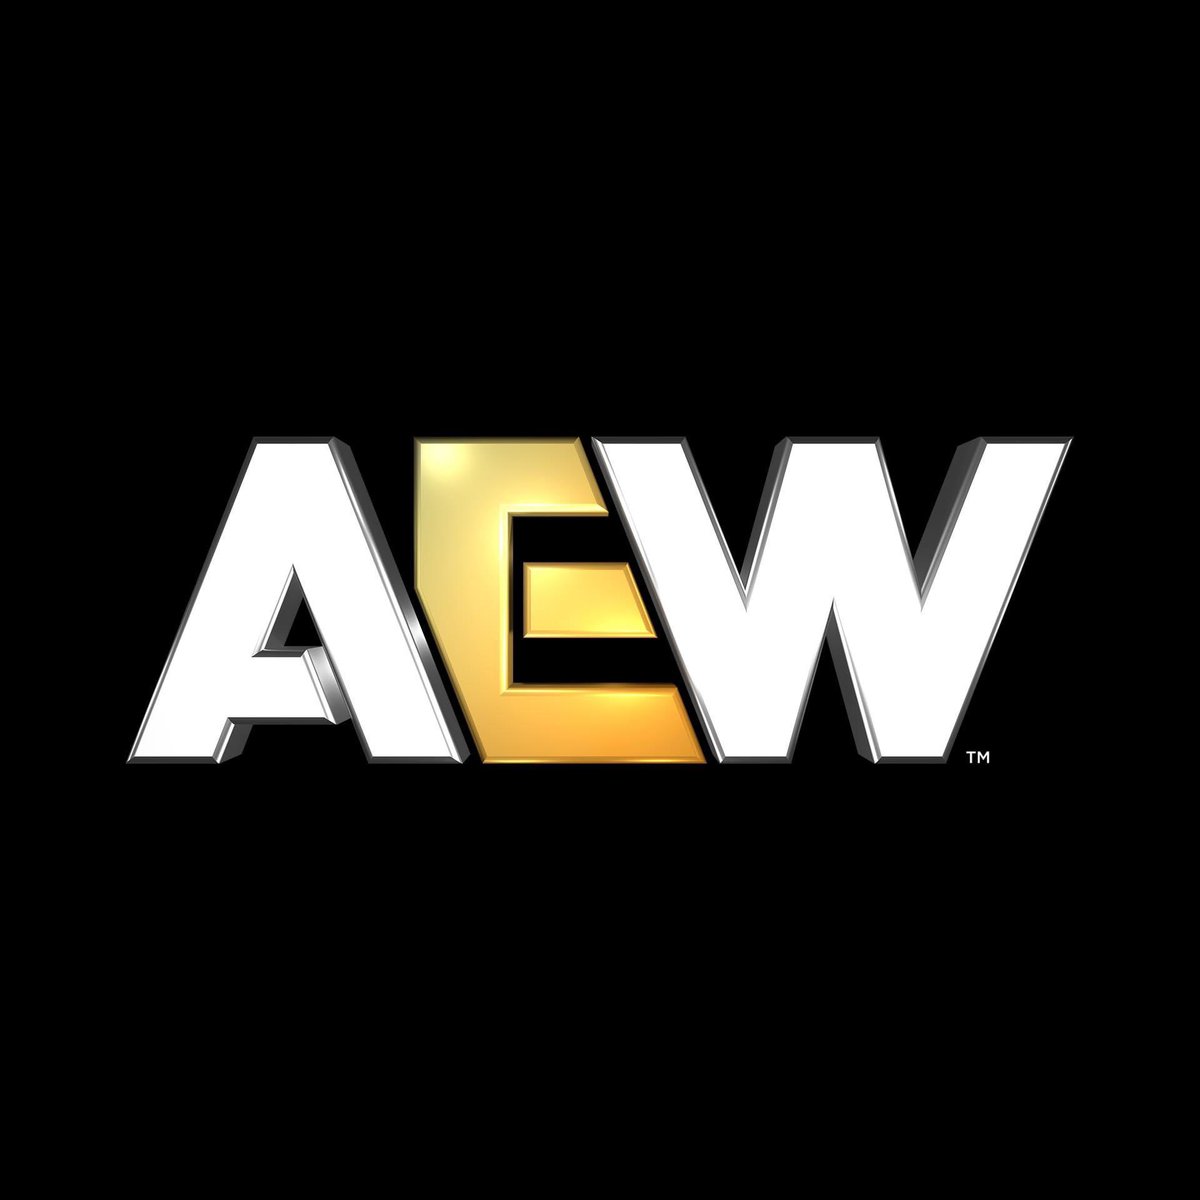 The last two years with the @PBR was amazing and I am so grateful for the opportunity. I am excited to start a new chapter as the Senior Marketing Director of Live Events for @AEW! There are so many amazing things happening here and I’m excited to be a part of the journey.